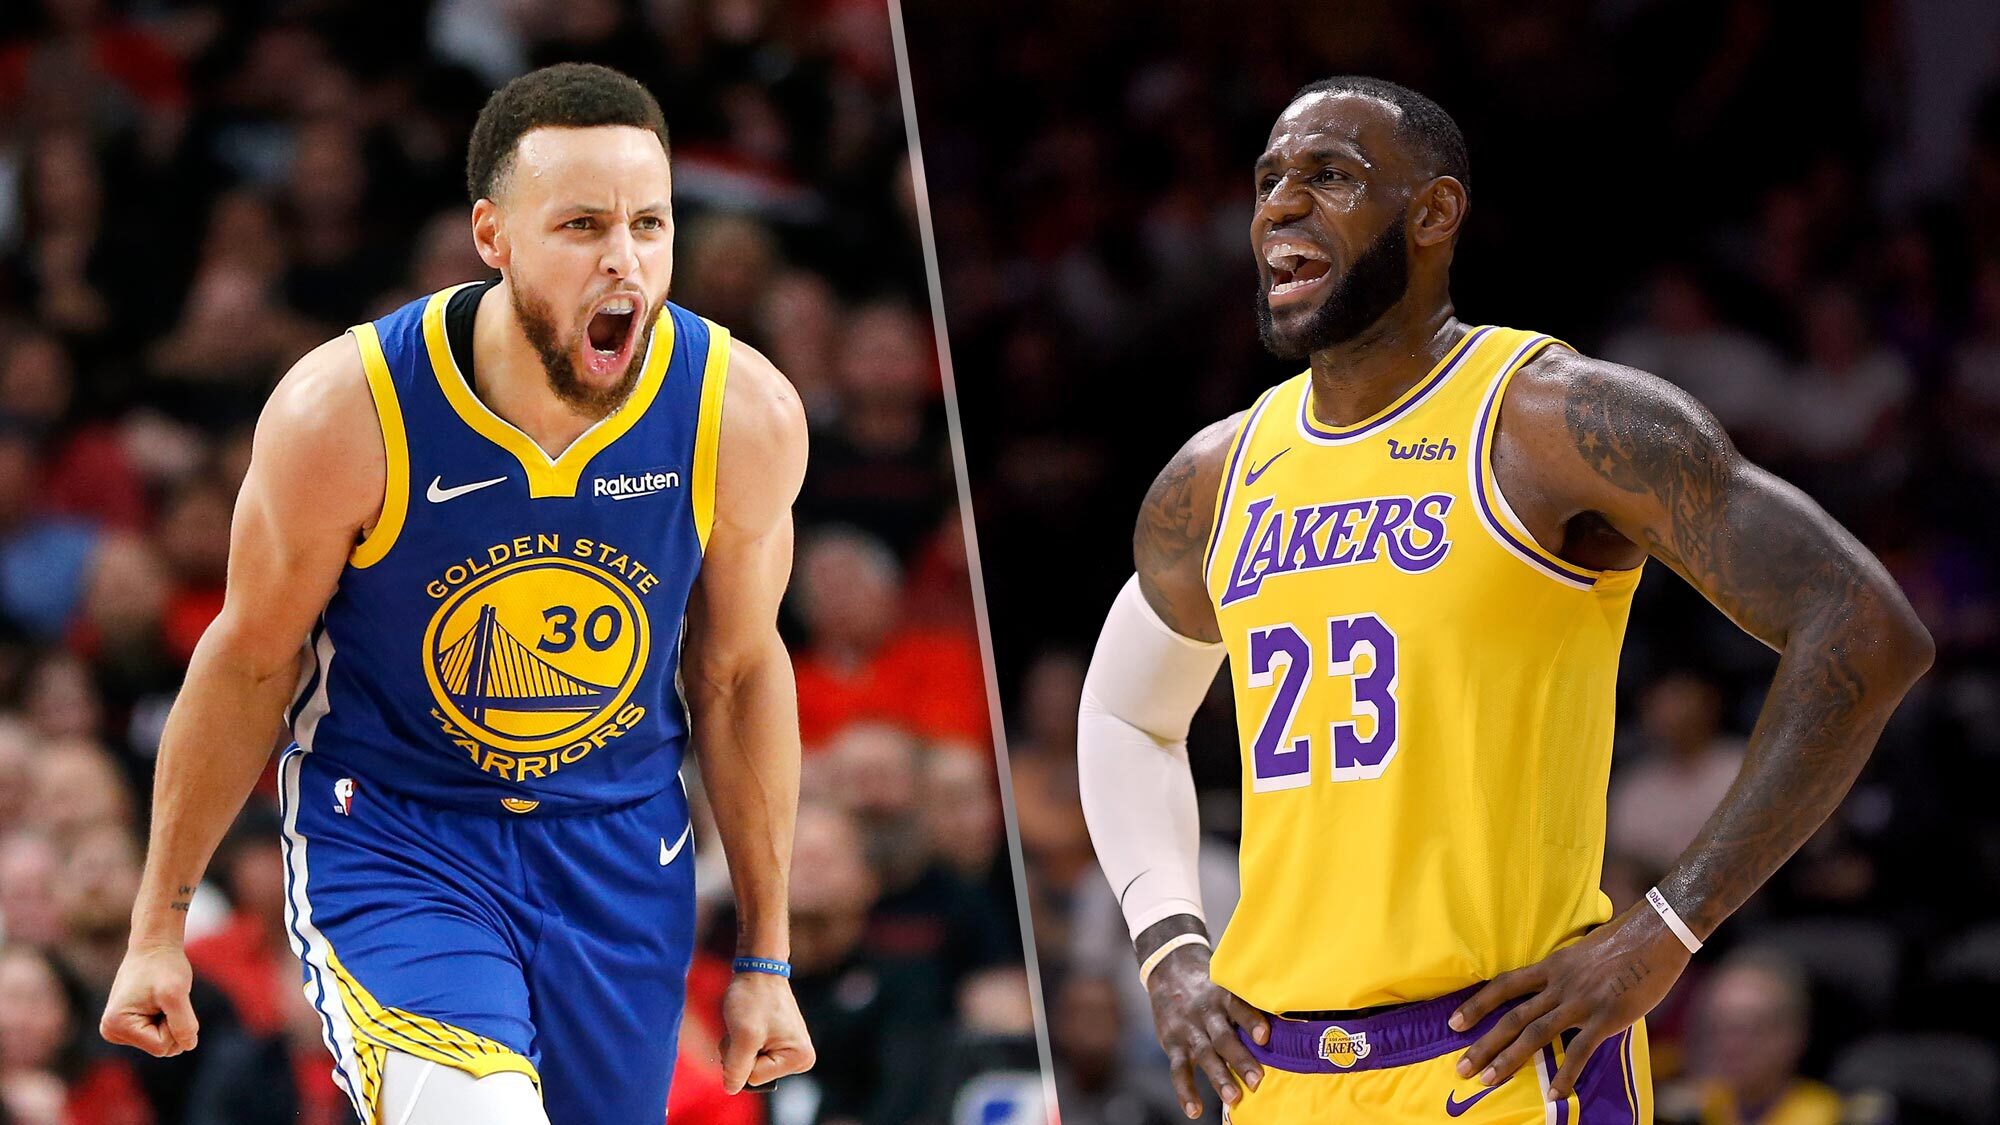 Warriors vs Lakers live stream: How to watch the NBA Playoffs online |  Tom's Guide